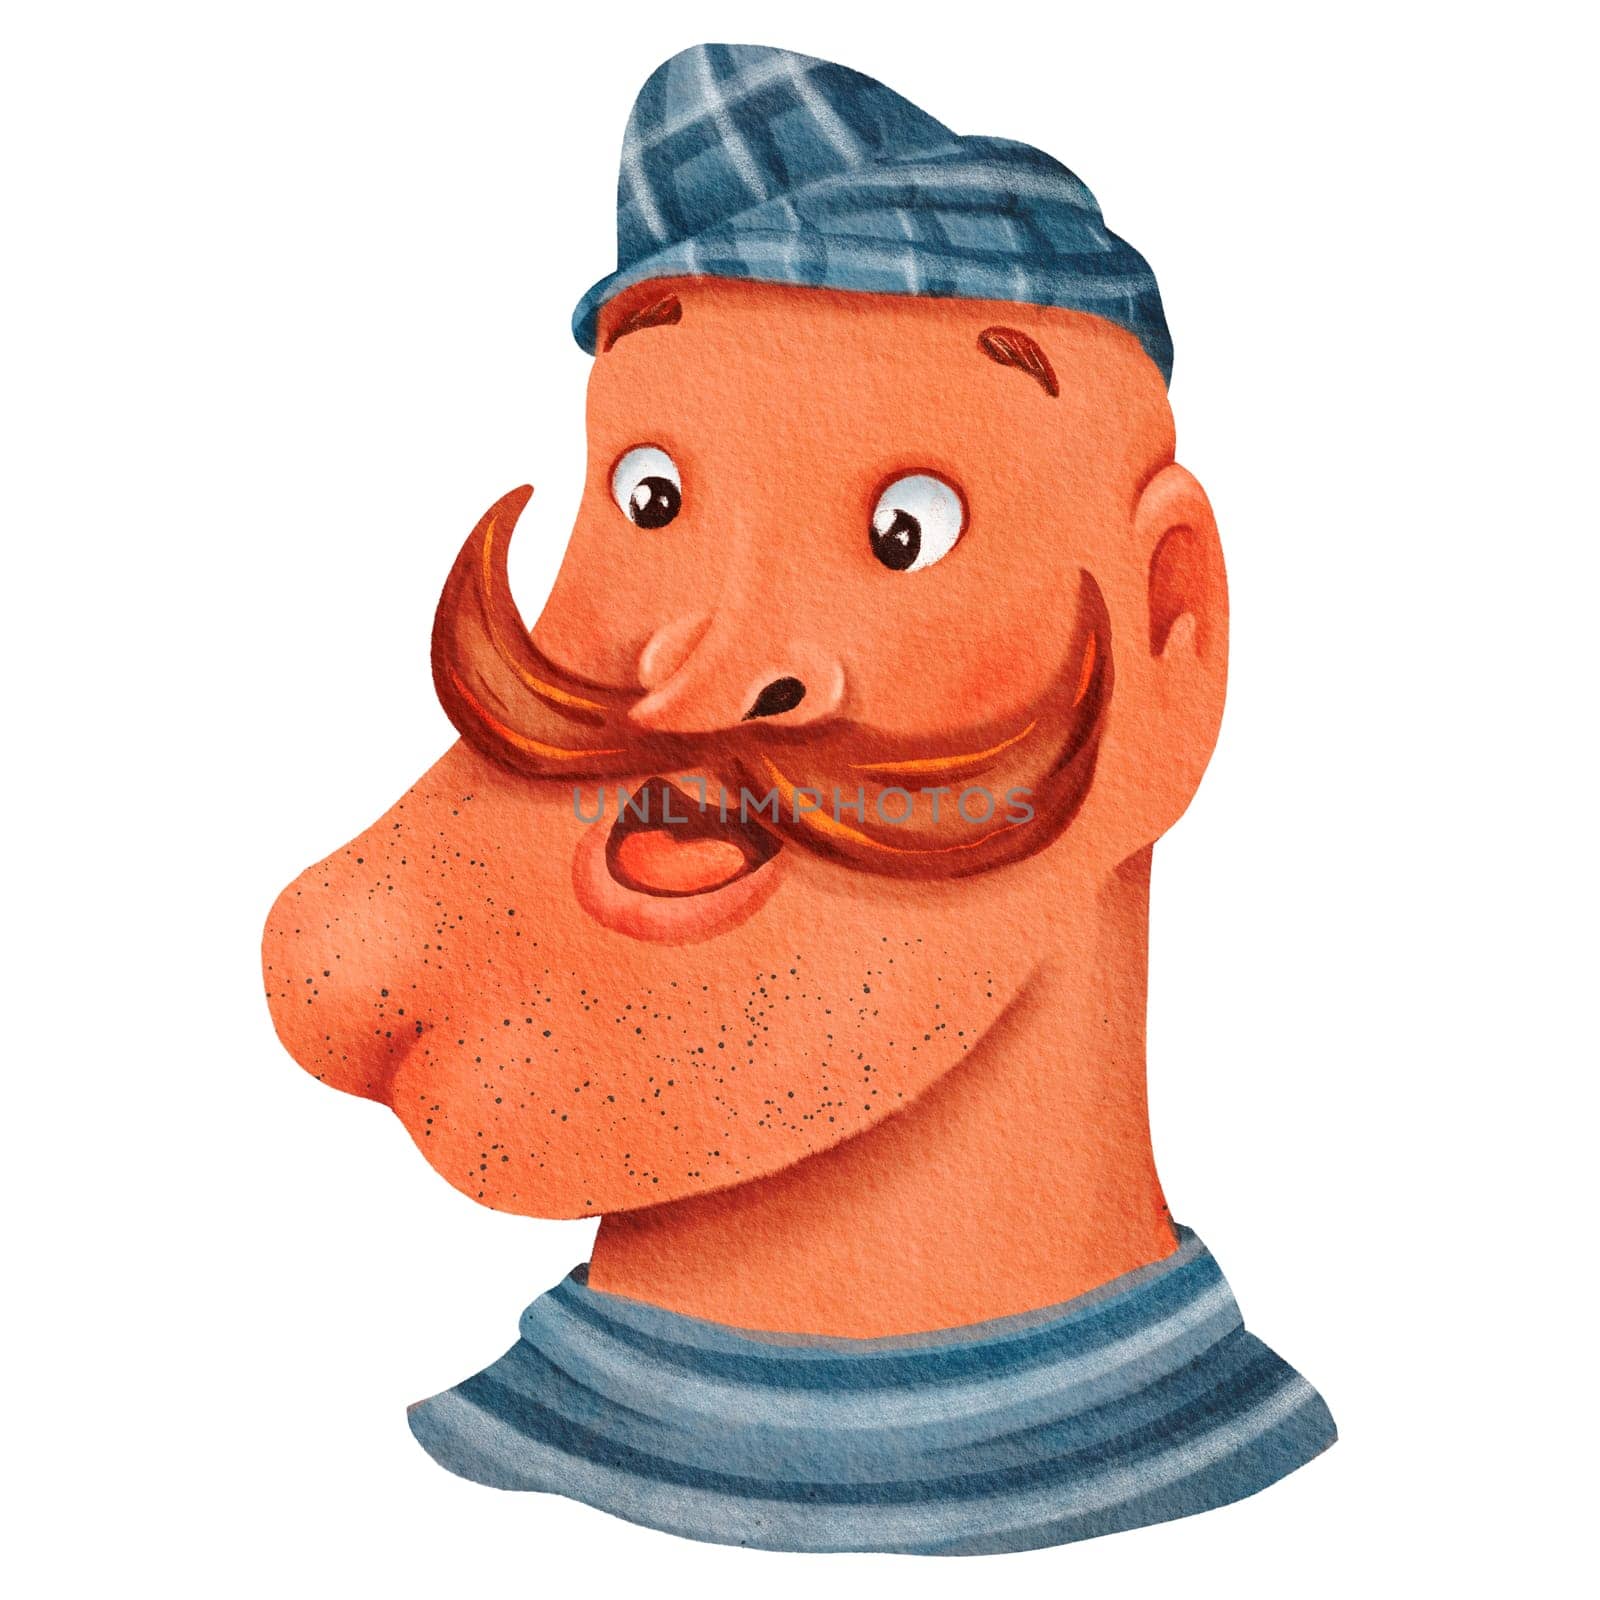 Fictional character with striped shirt, hat, and mustache illustration by Art_Mari_Ka